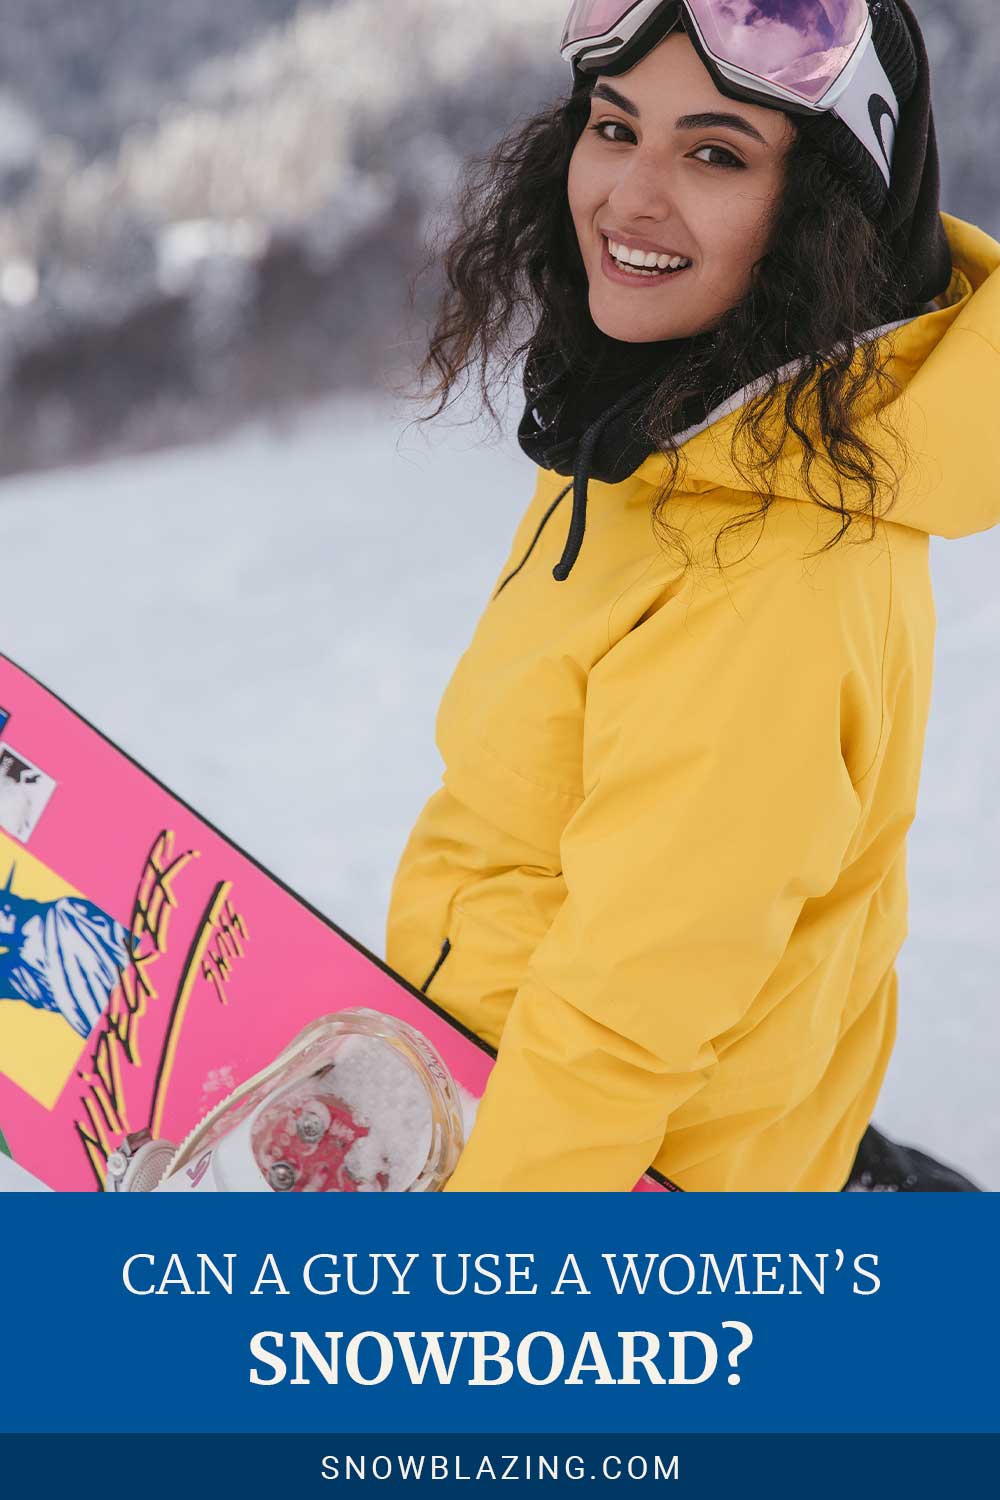 Woman in yellow jacket smiling with a snowboard in her hand - Can a Guy Use a Women’s Snowboard?